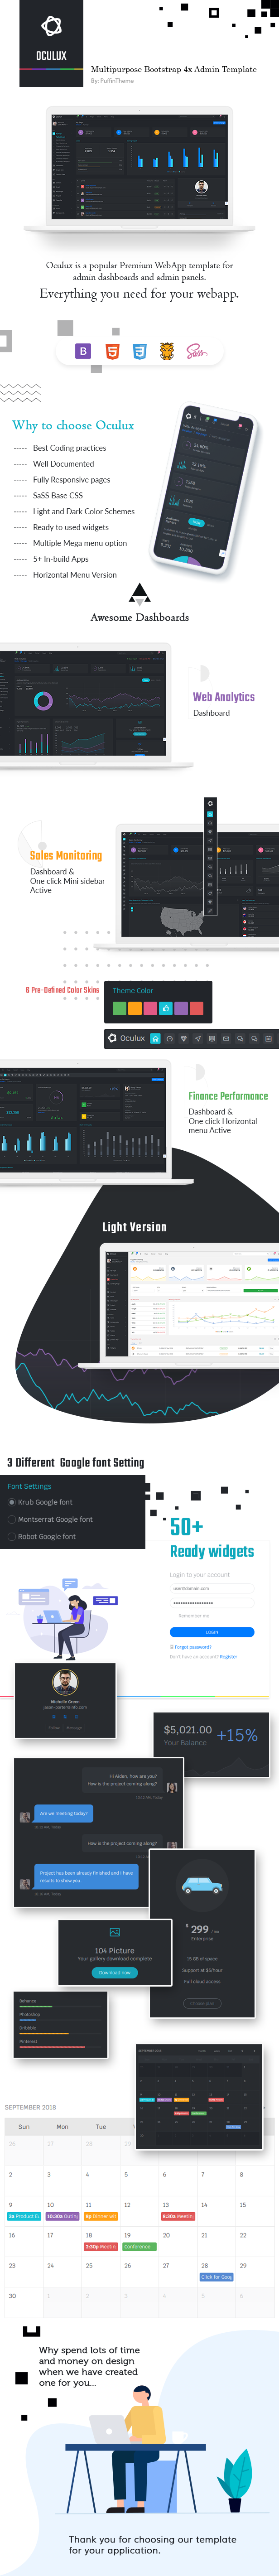 full review3 - Oculux - Bootstrap 4.5.0 Admin Dashboard Template & UI KIT